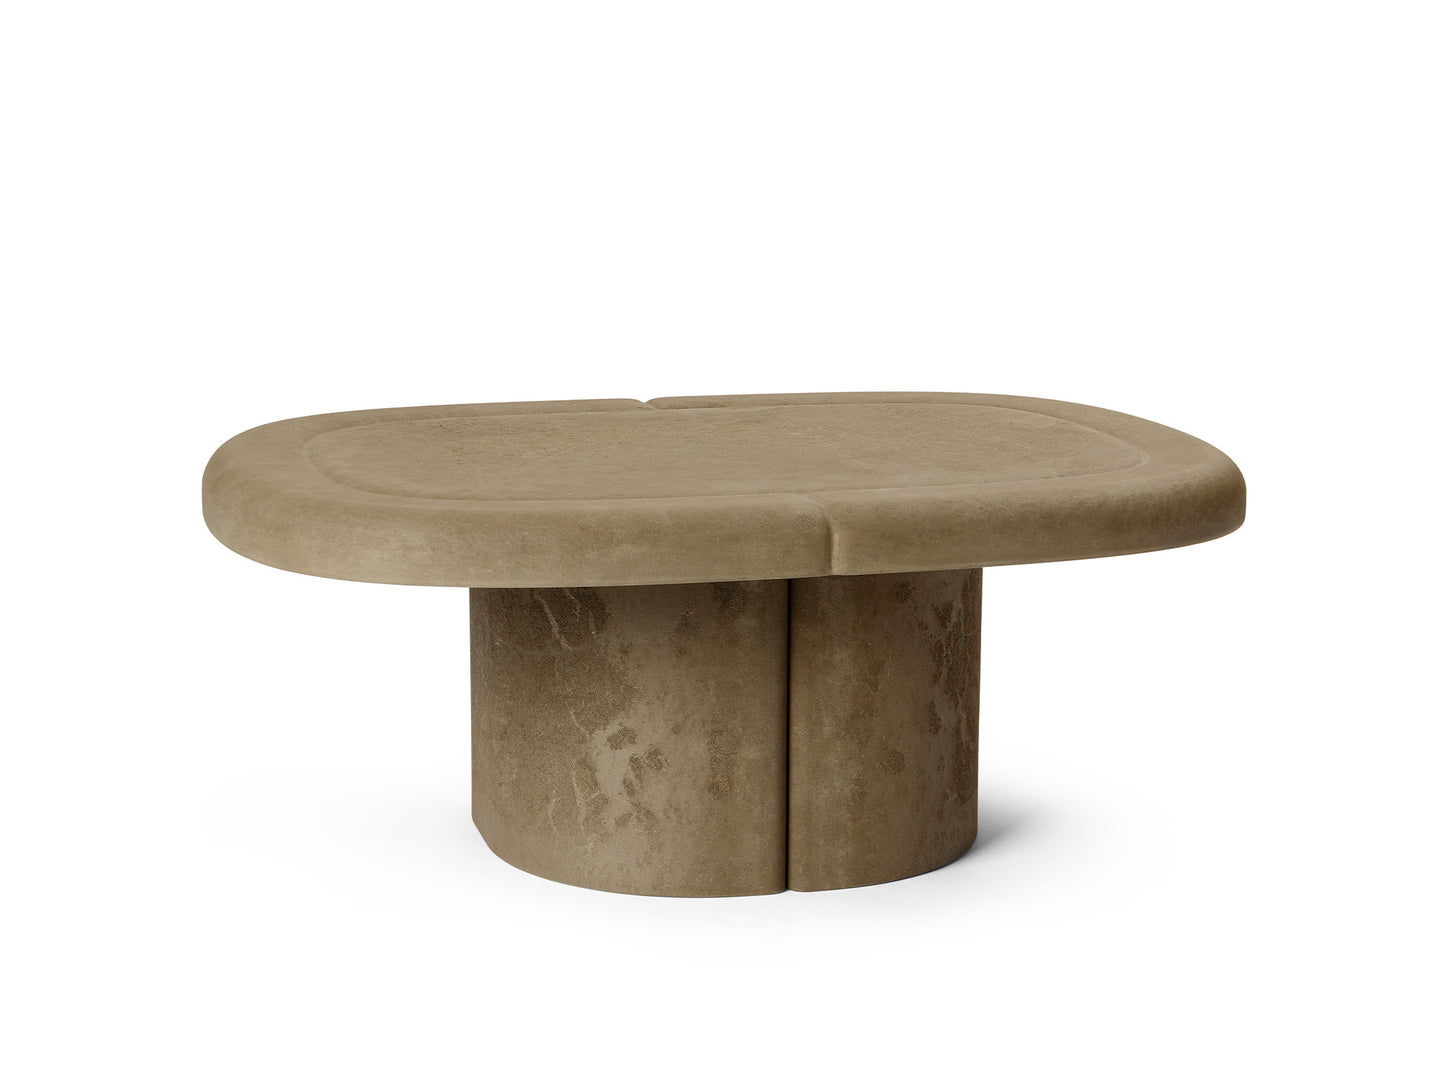 Alder Lounge Table by Mater - Oval / Earth Grey